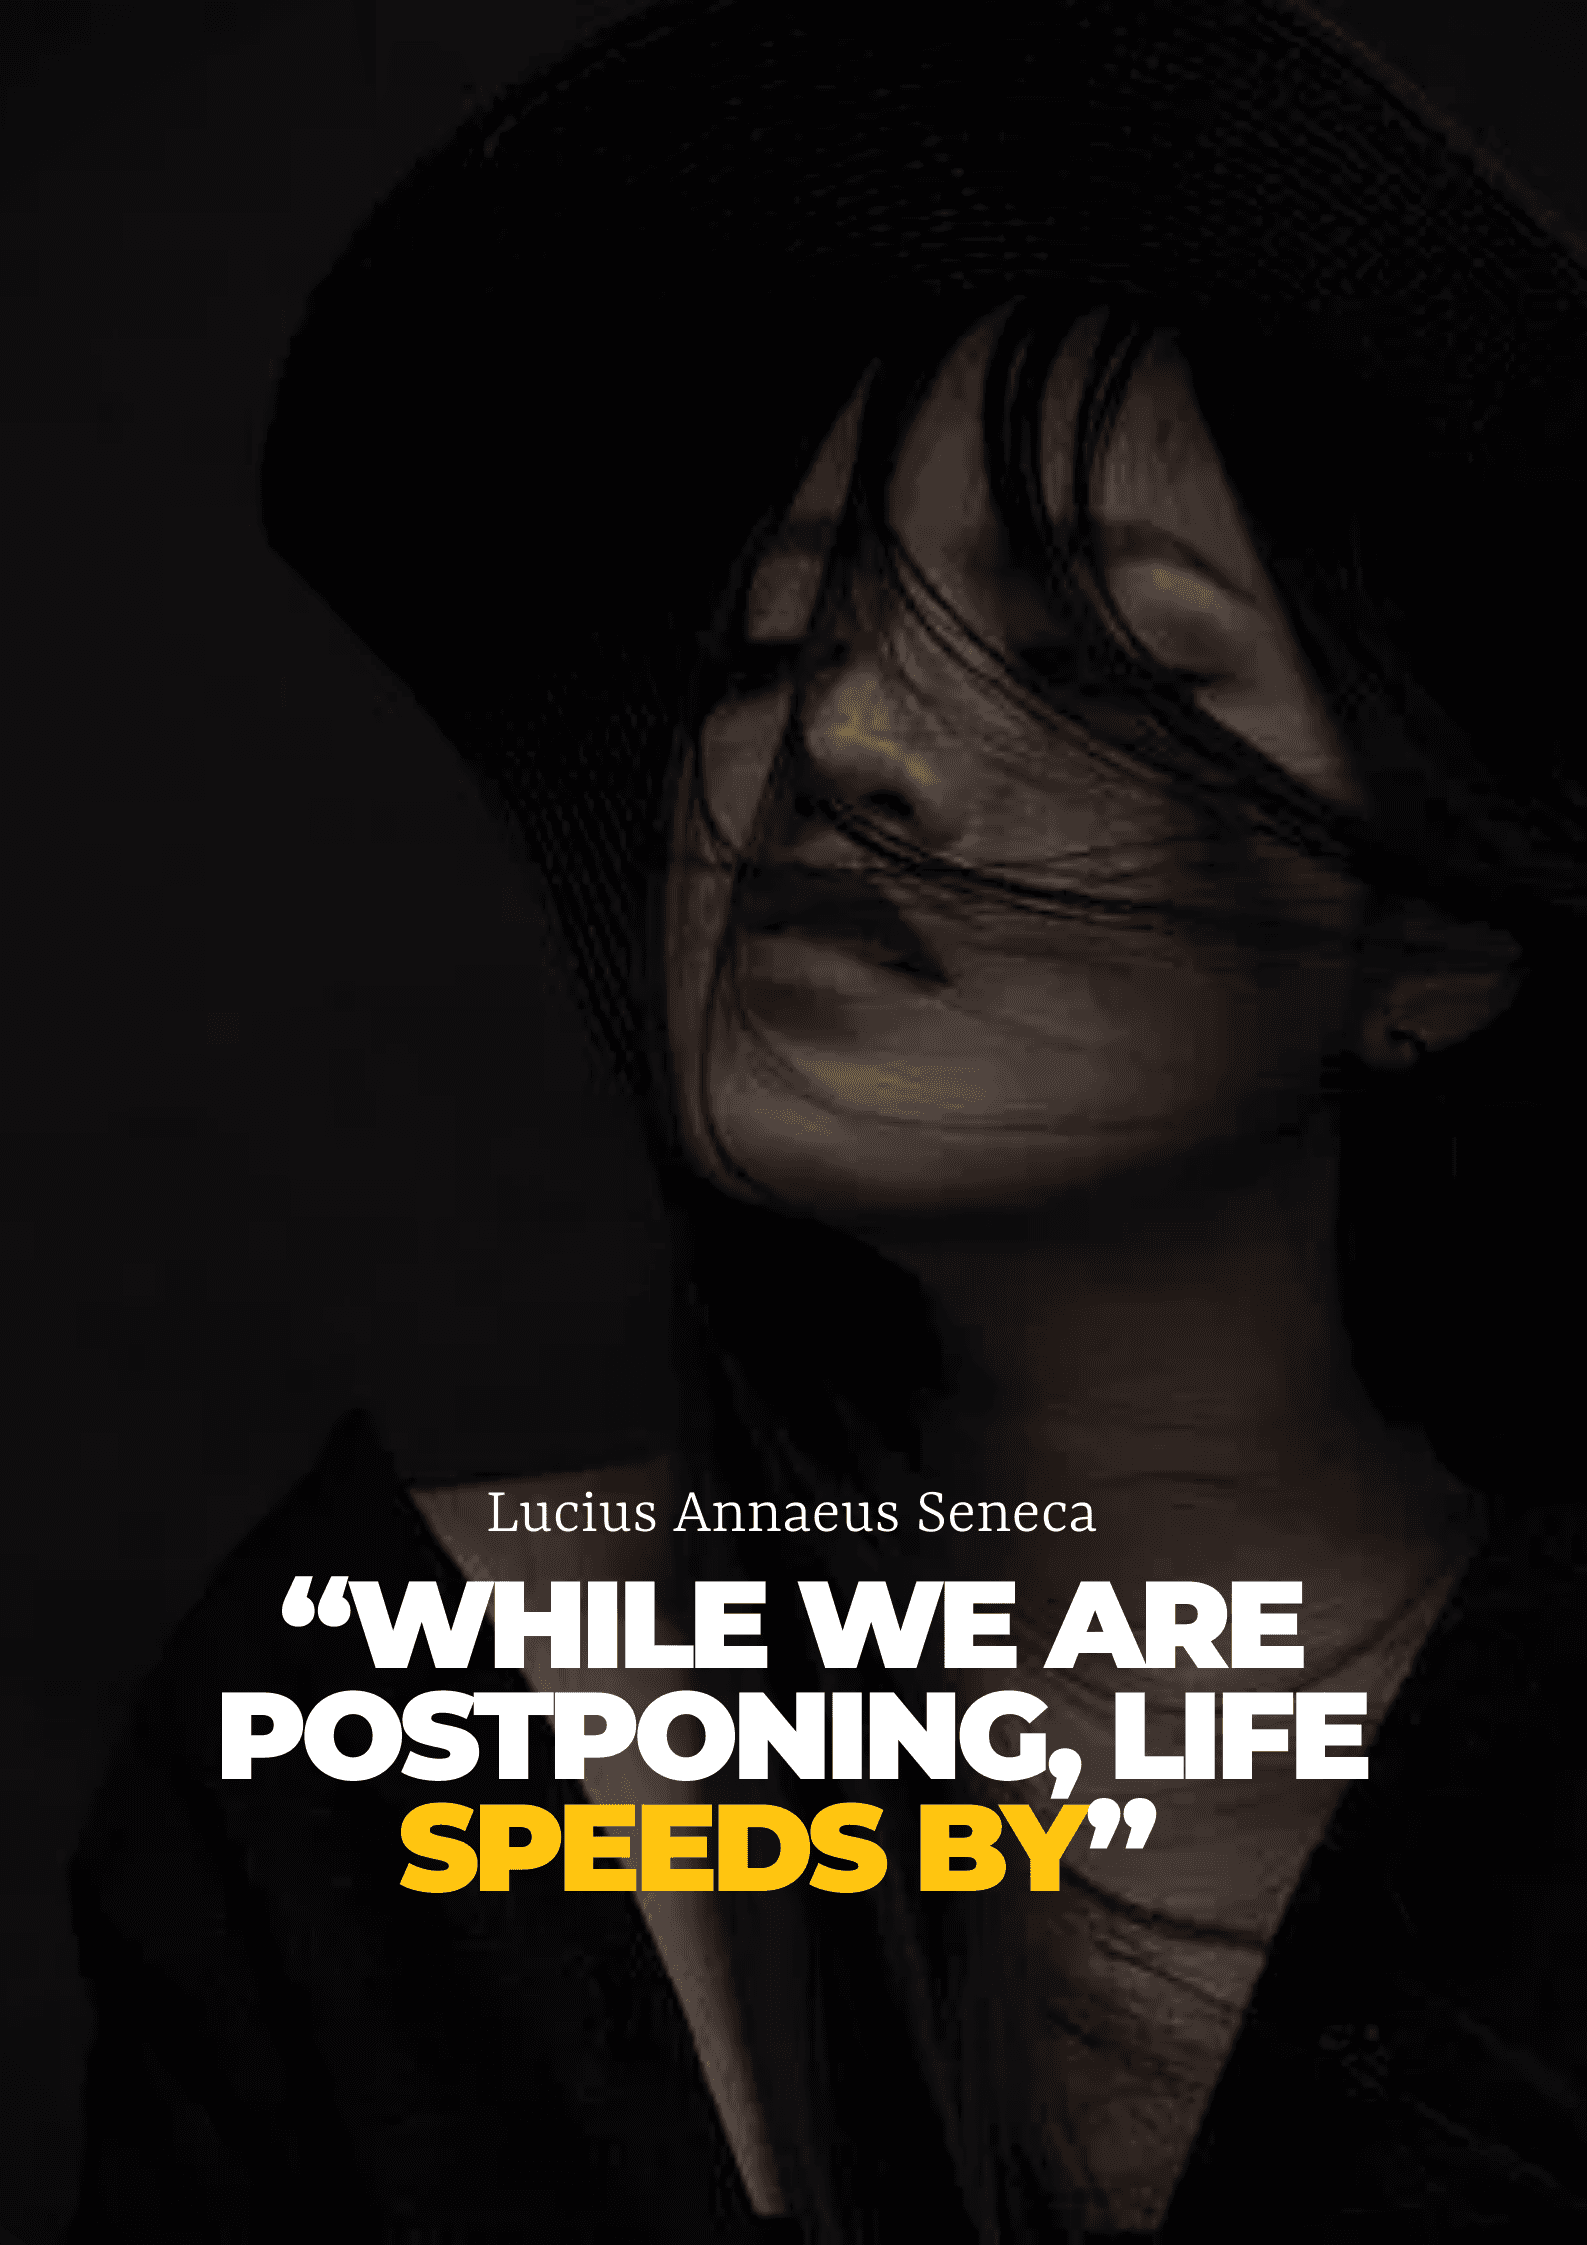 woman-wearing-a-black-hat-life-speeds-by-quote-poster-thumbnail-img